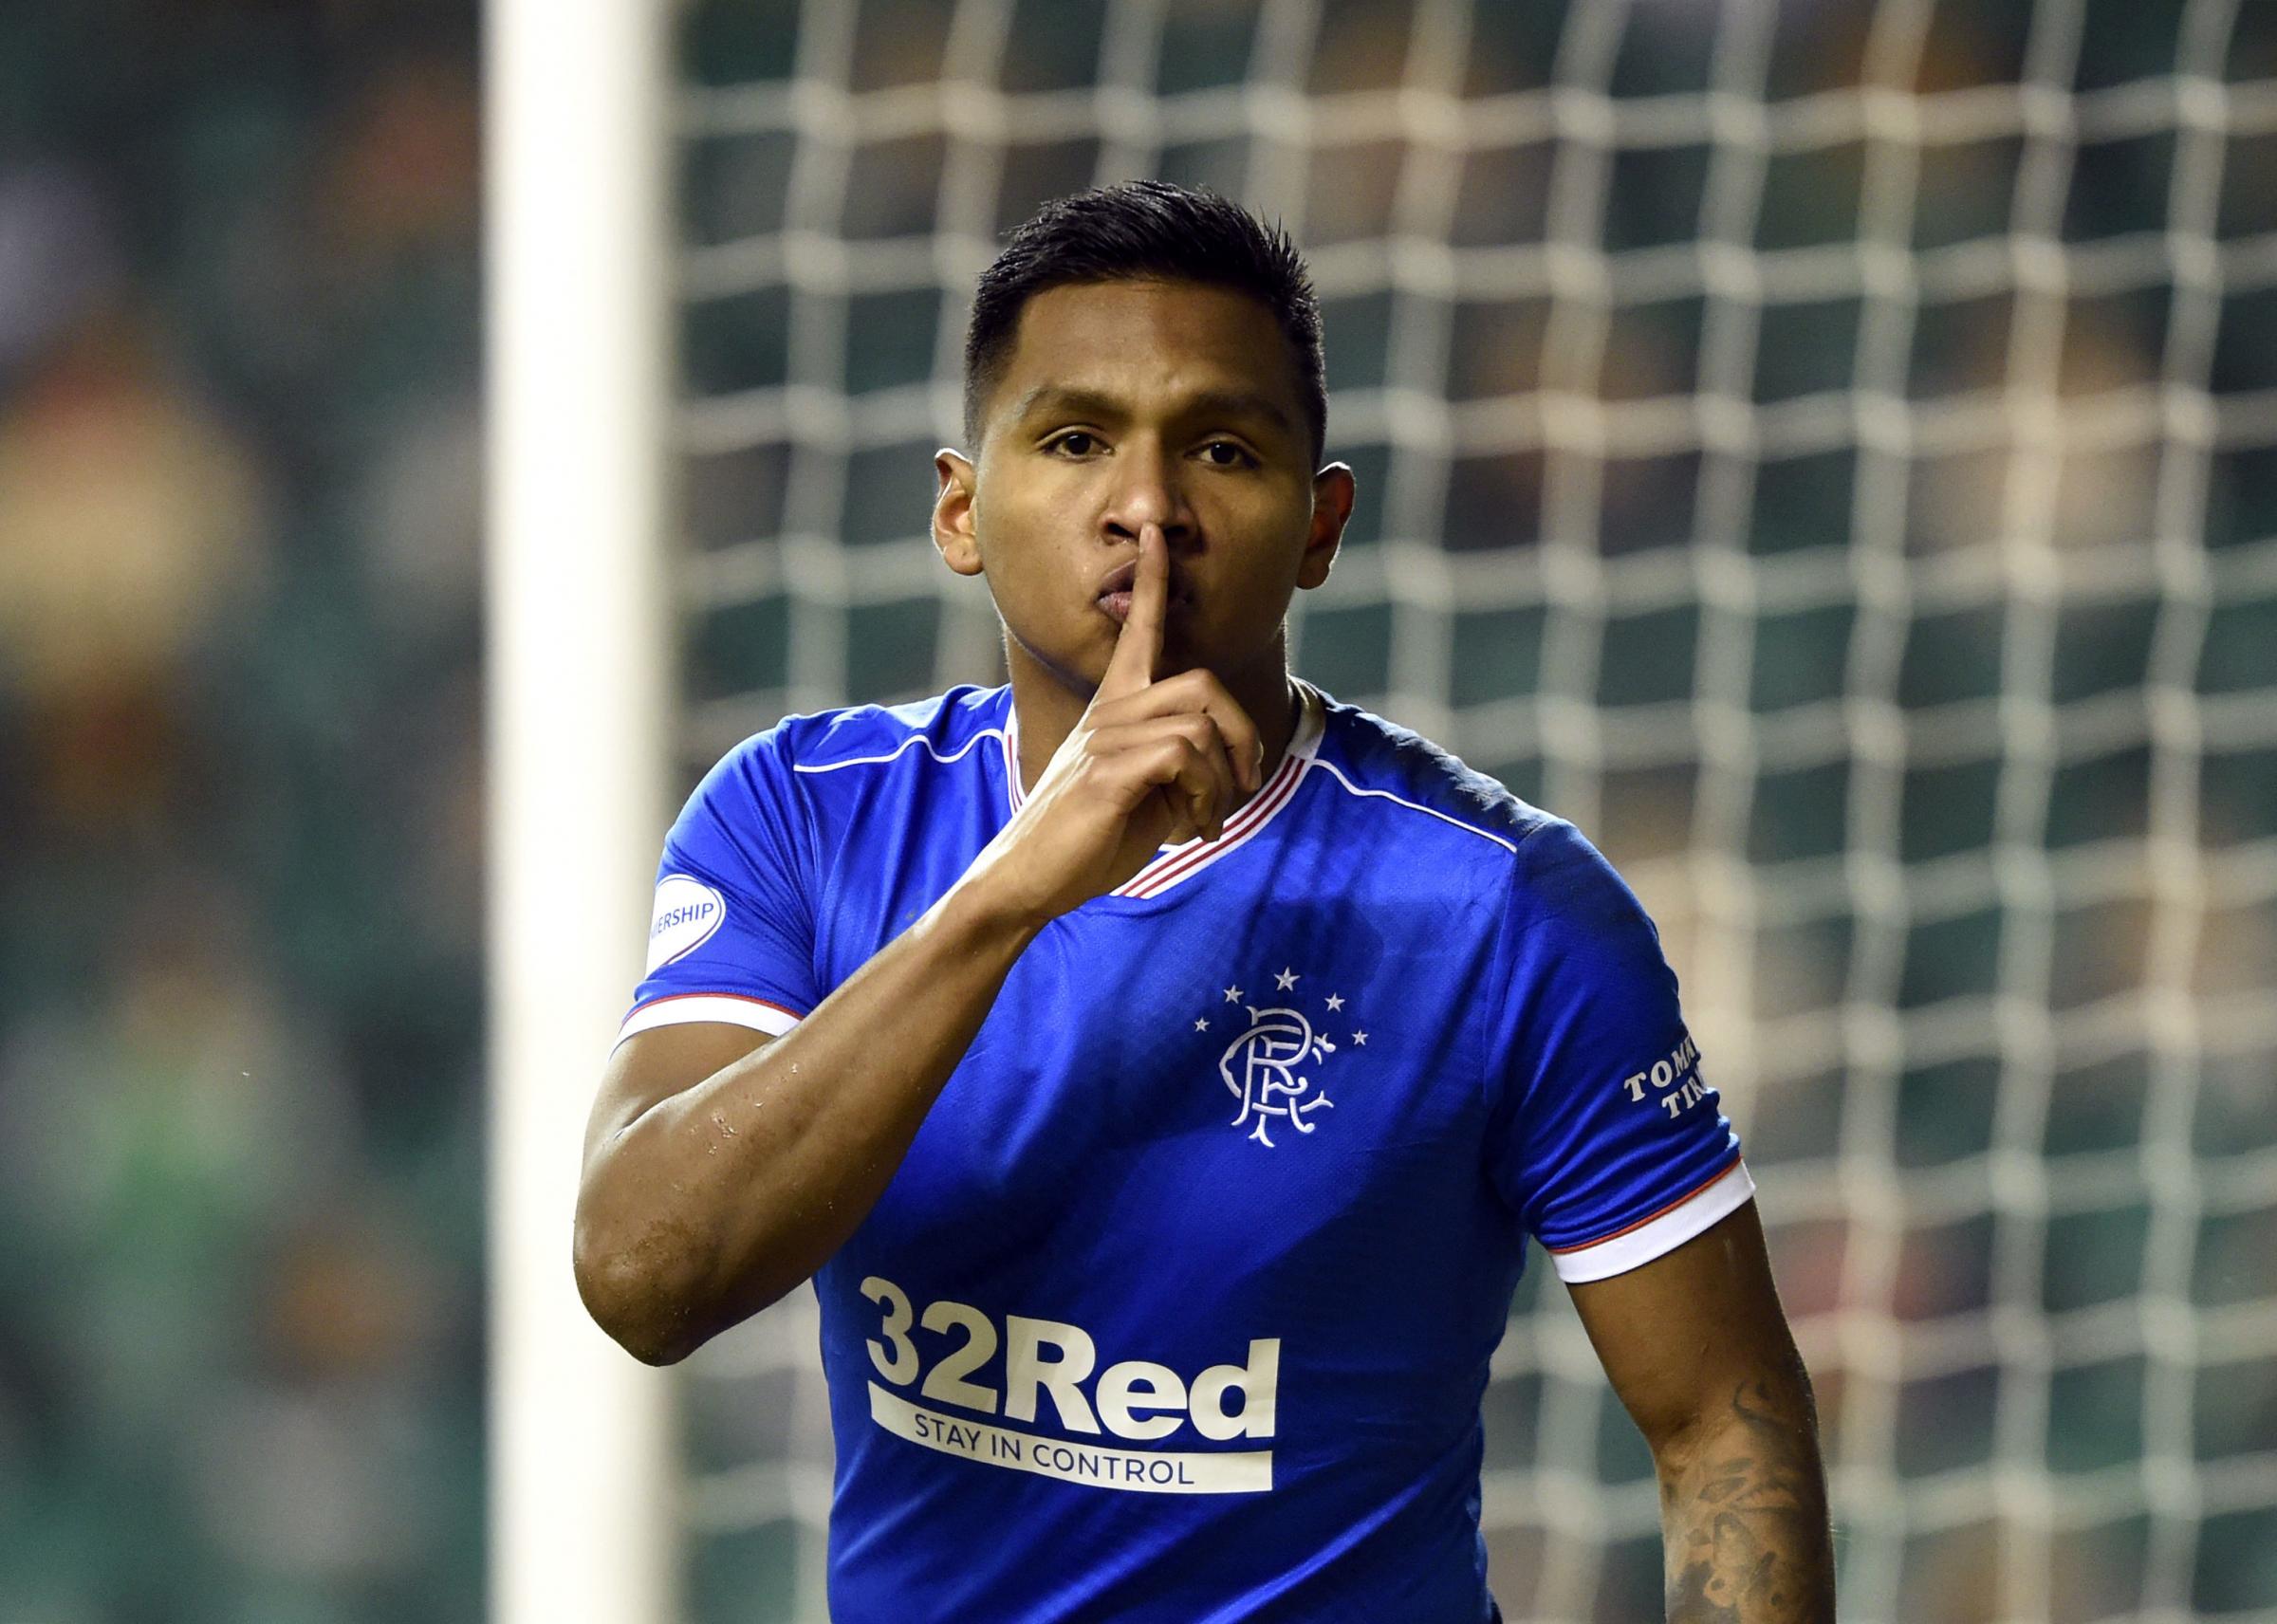 Rangers Alfredo Morelos celebrates scoring their sides first goal of the game during the Ladbrokes Scottish Premiership match at Easter Road